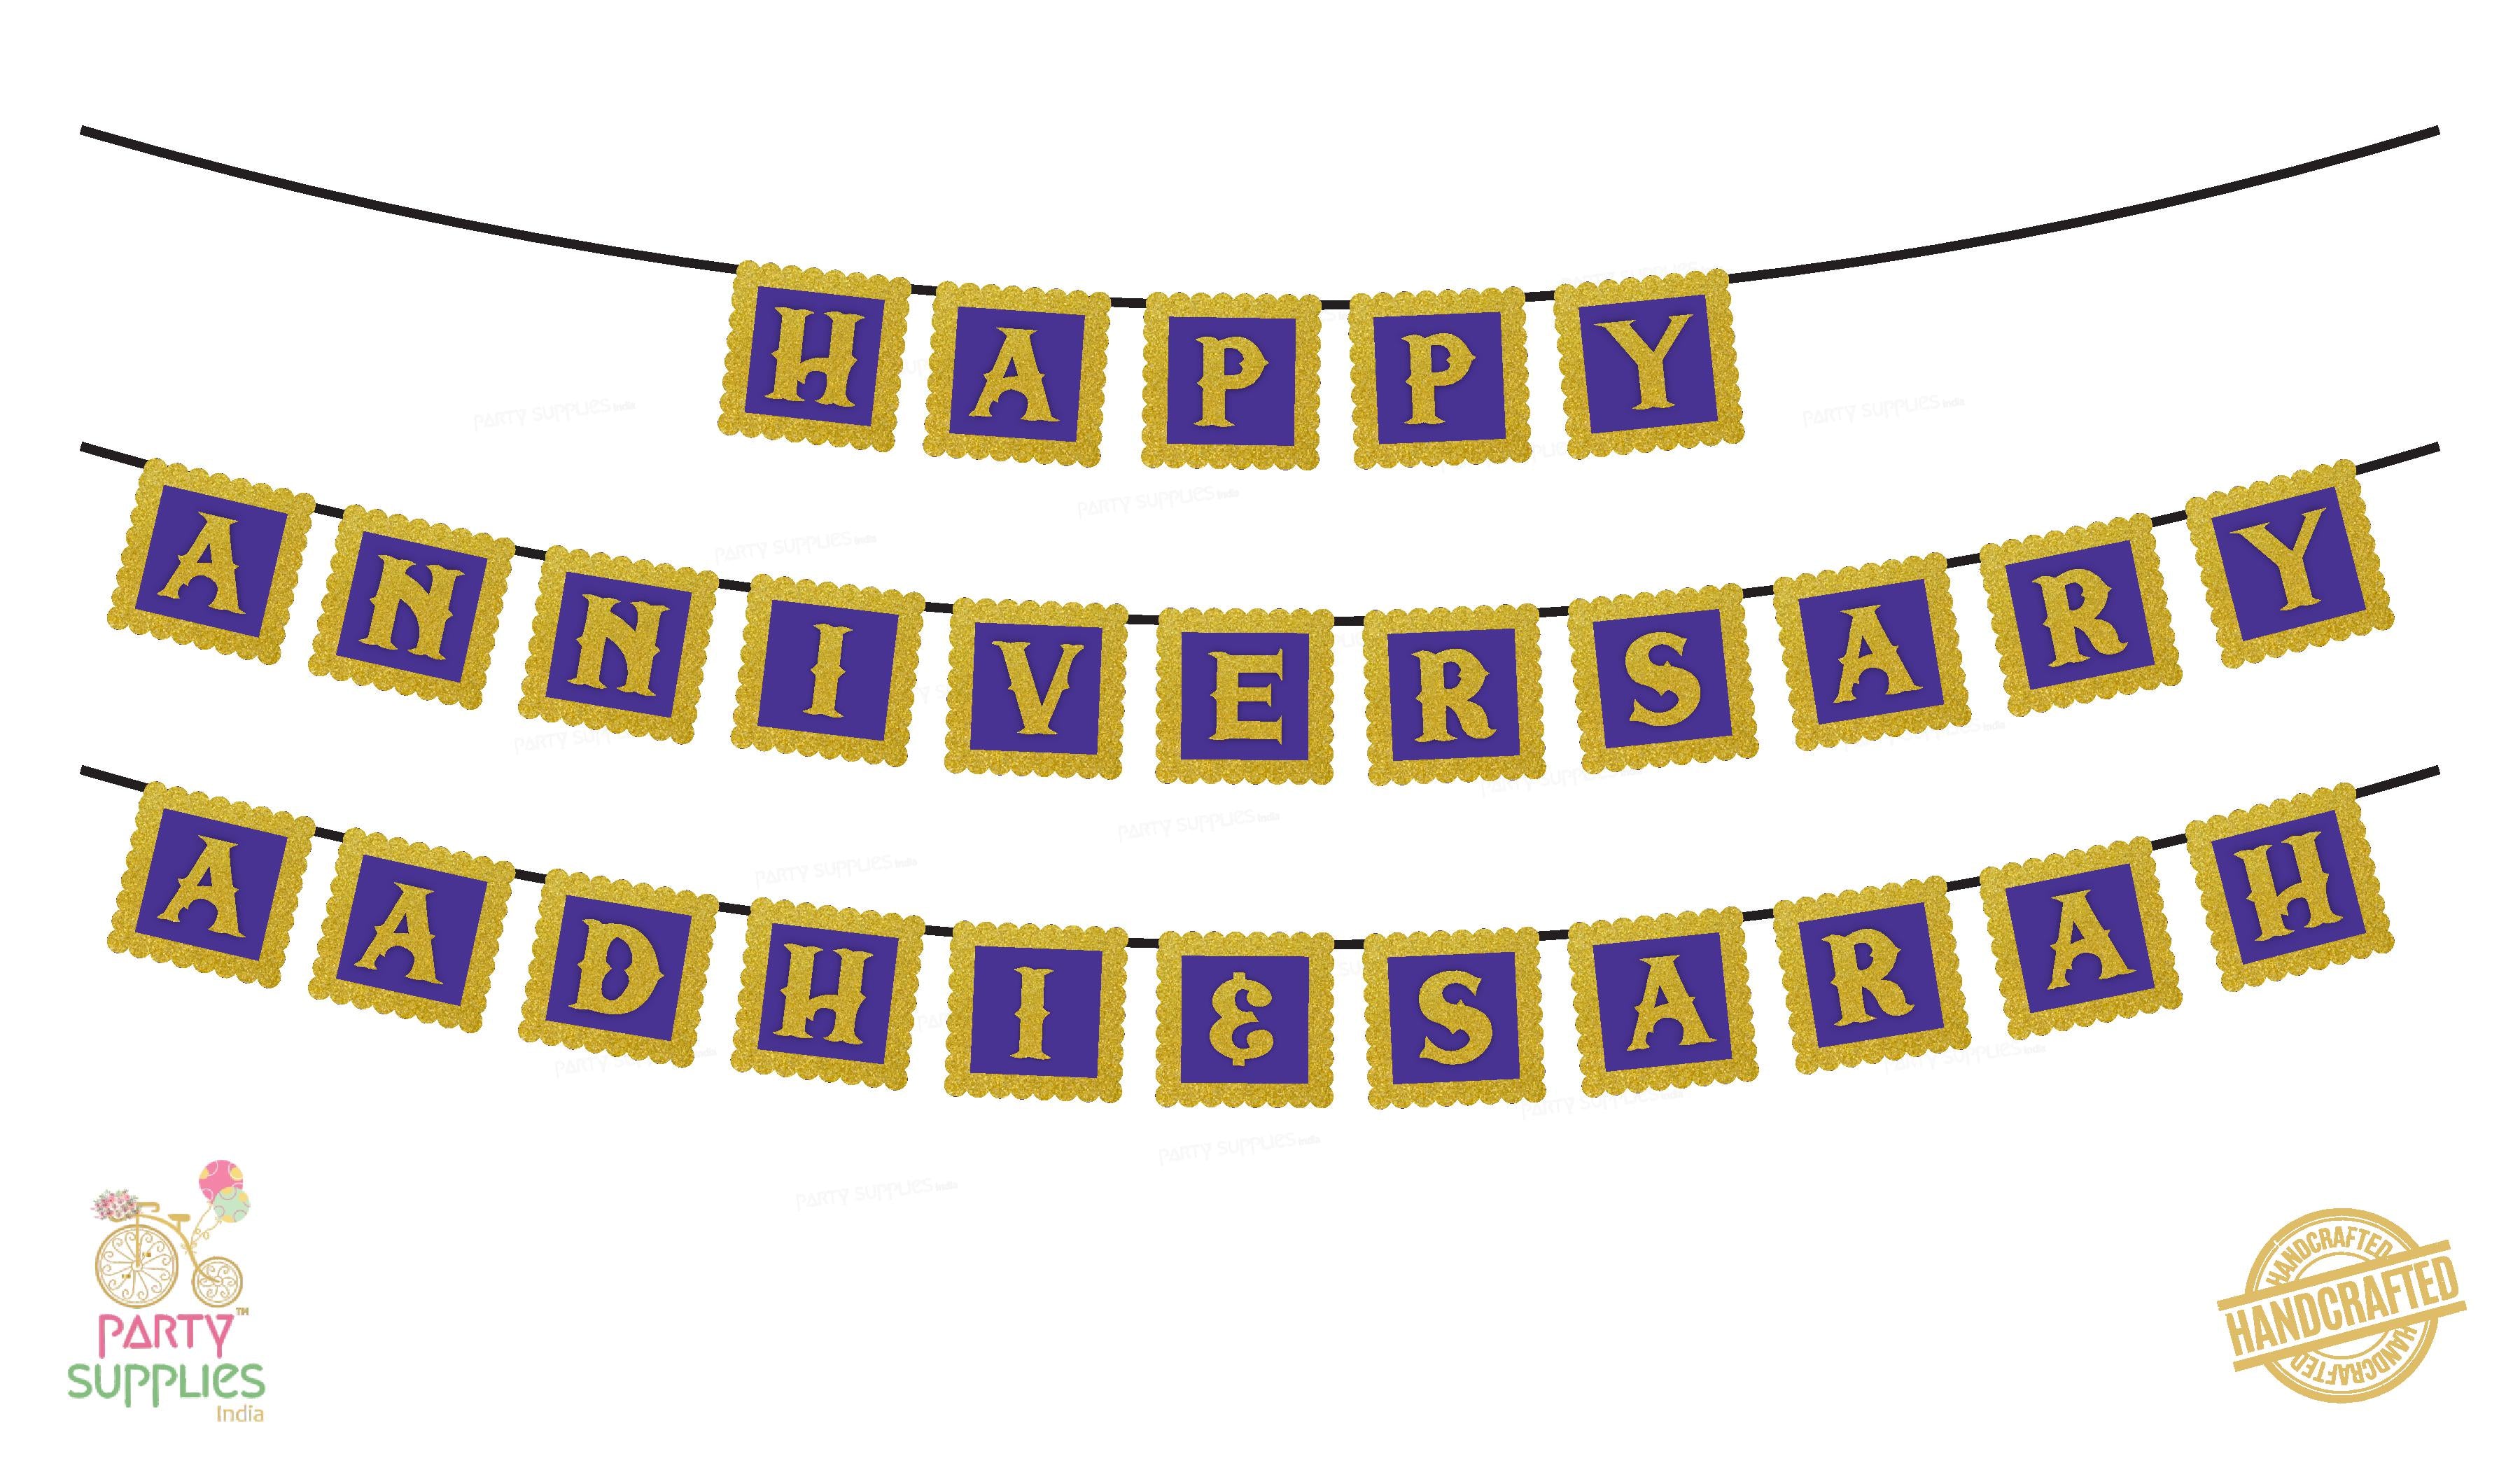 Hand Crafted Violet with Gold Happy Anniversary Bunting